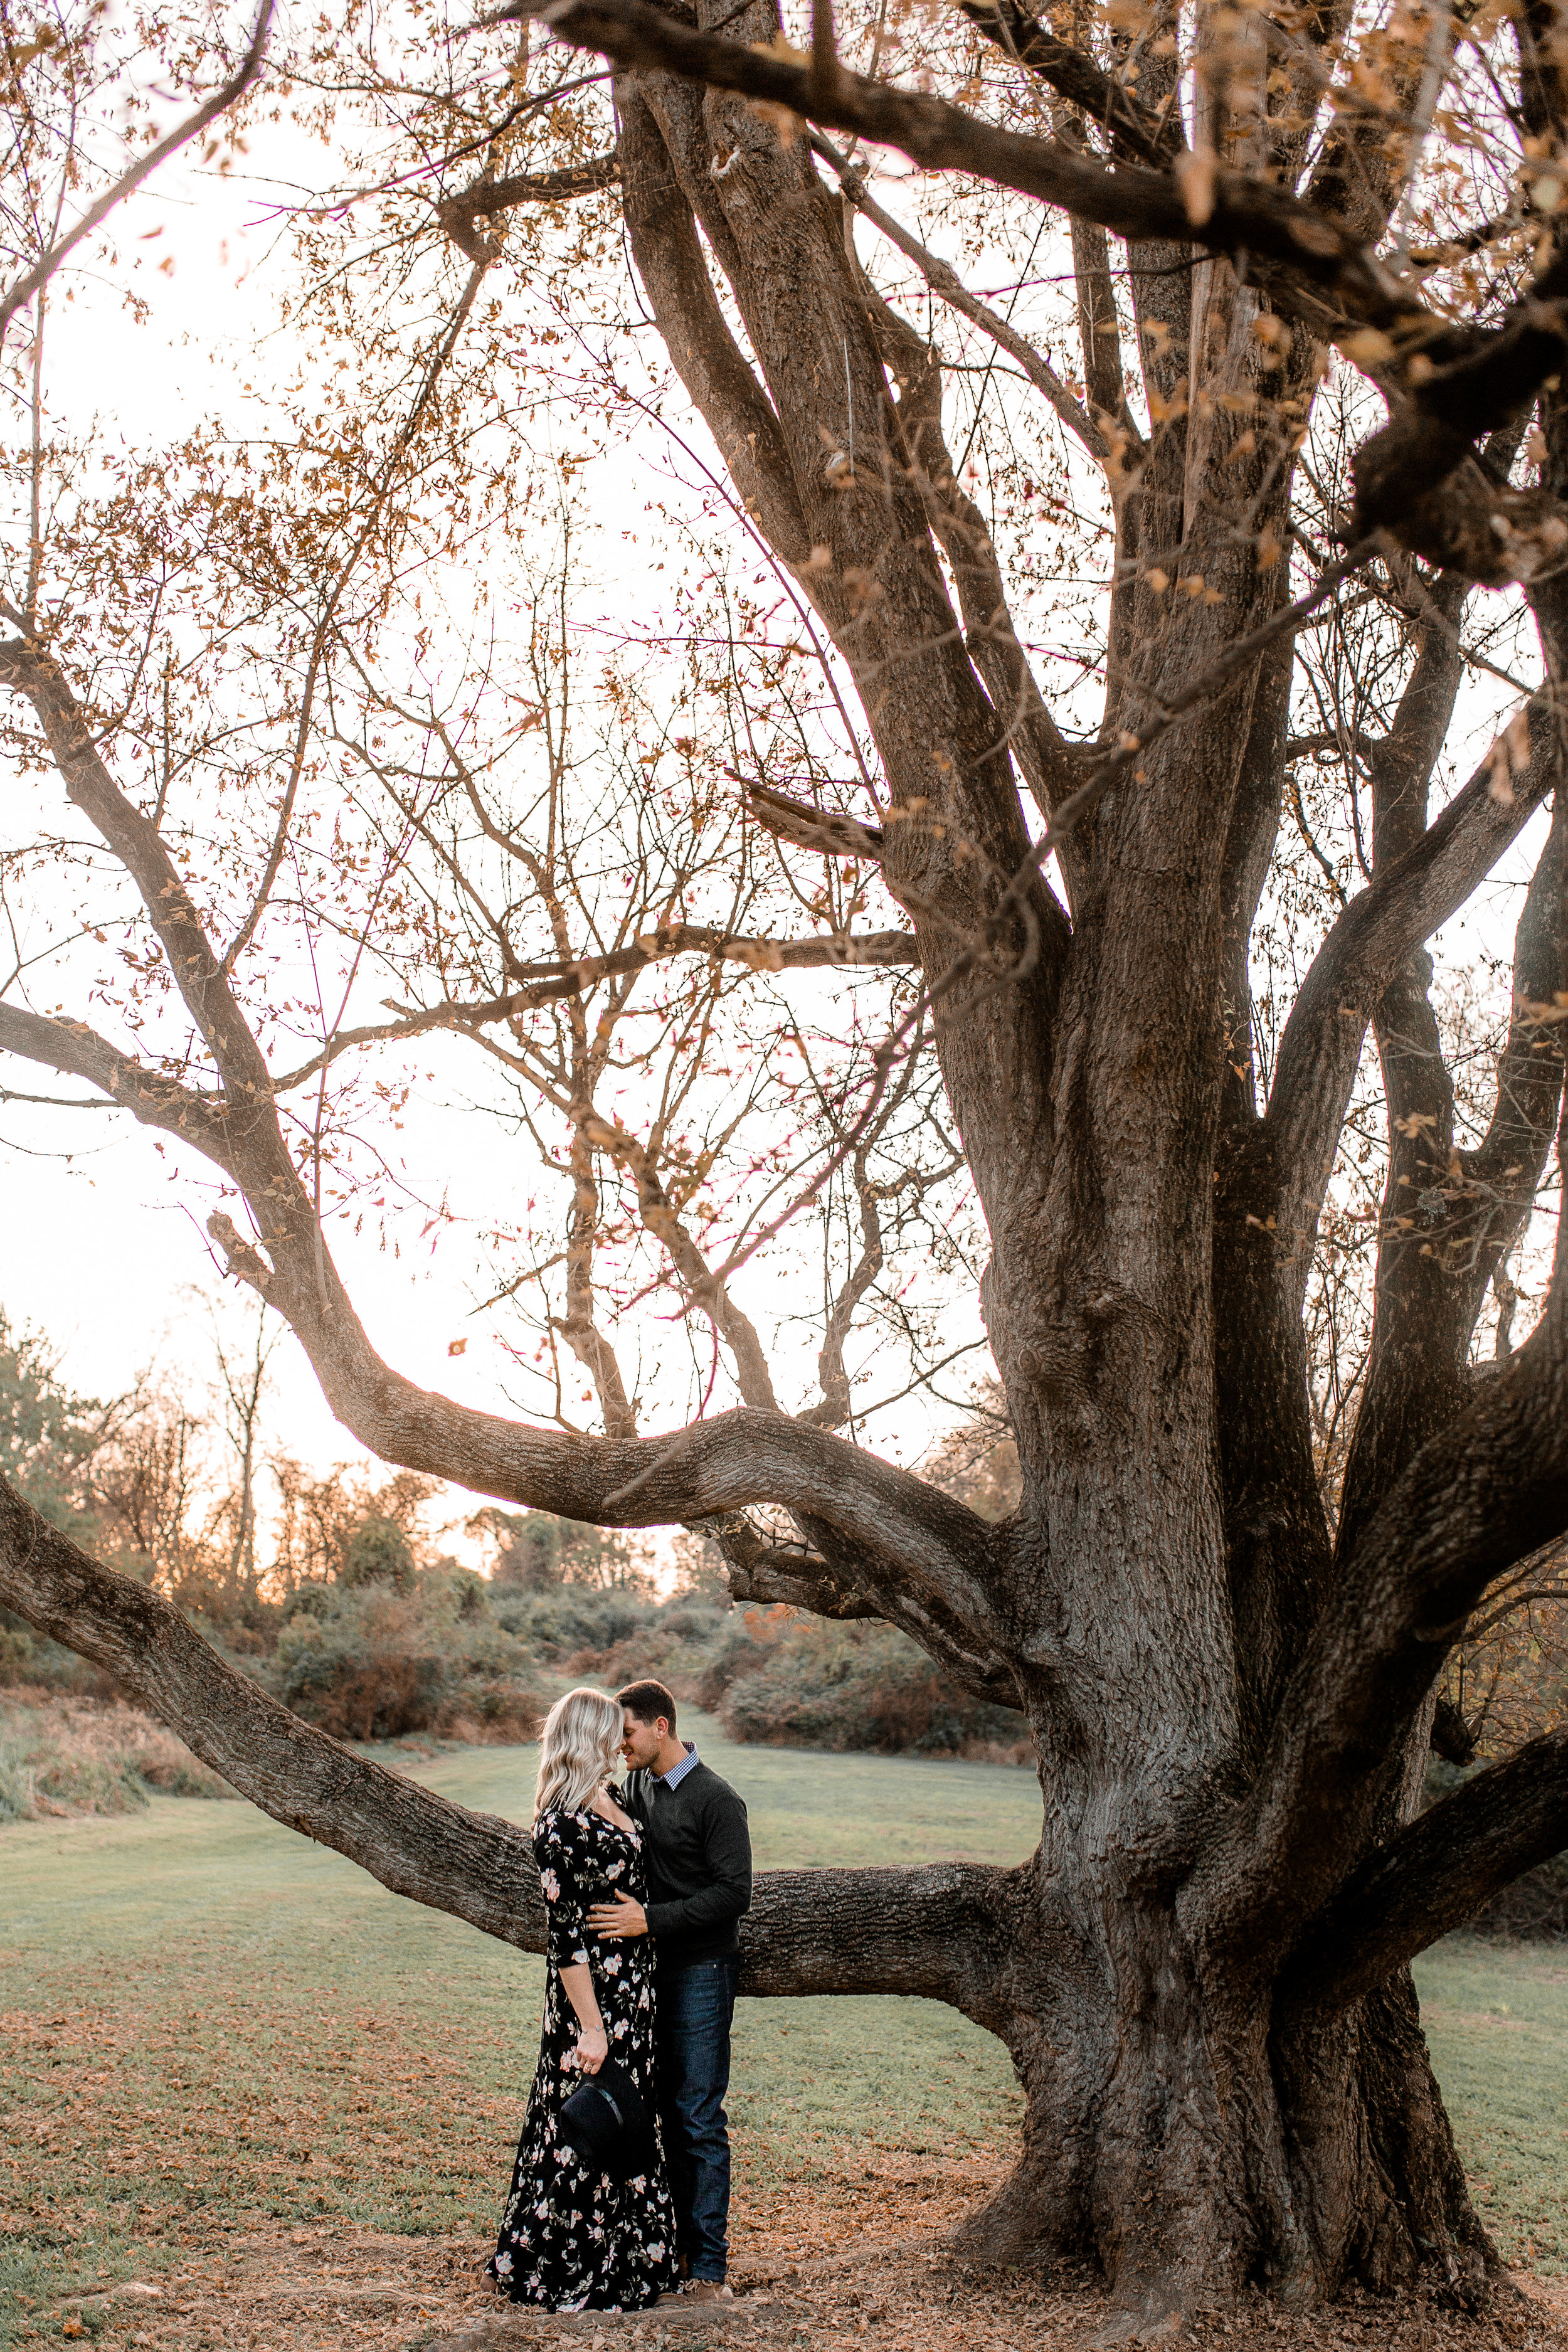 nicole-daacke-photography-carefree-bohemian-lancaster-pa-pennsylvania-engagement-photos-engagement-session-golden-sunset-adventure-session-in-lancaster-pa-lancaster-pa-outdoor-wedding-photographer-26.jpg